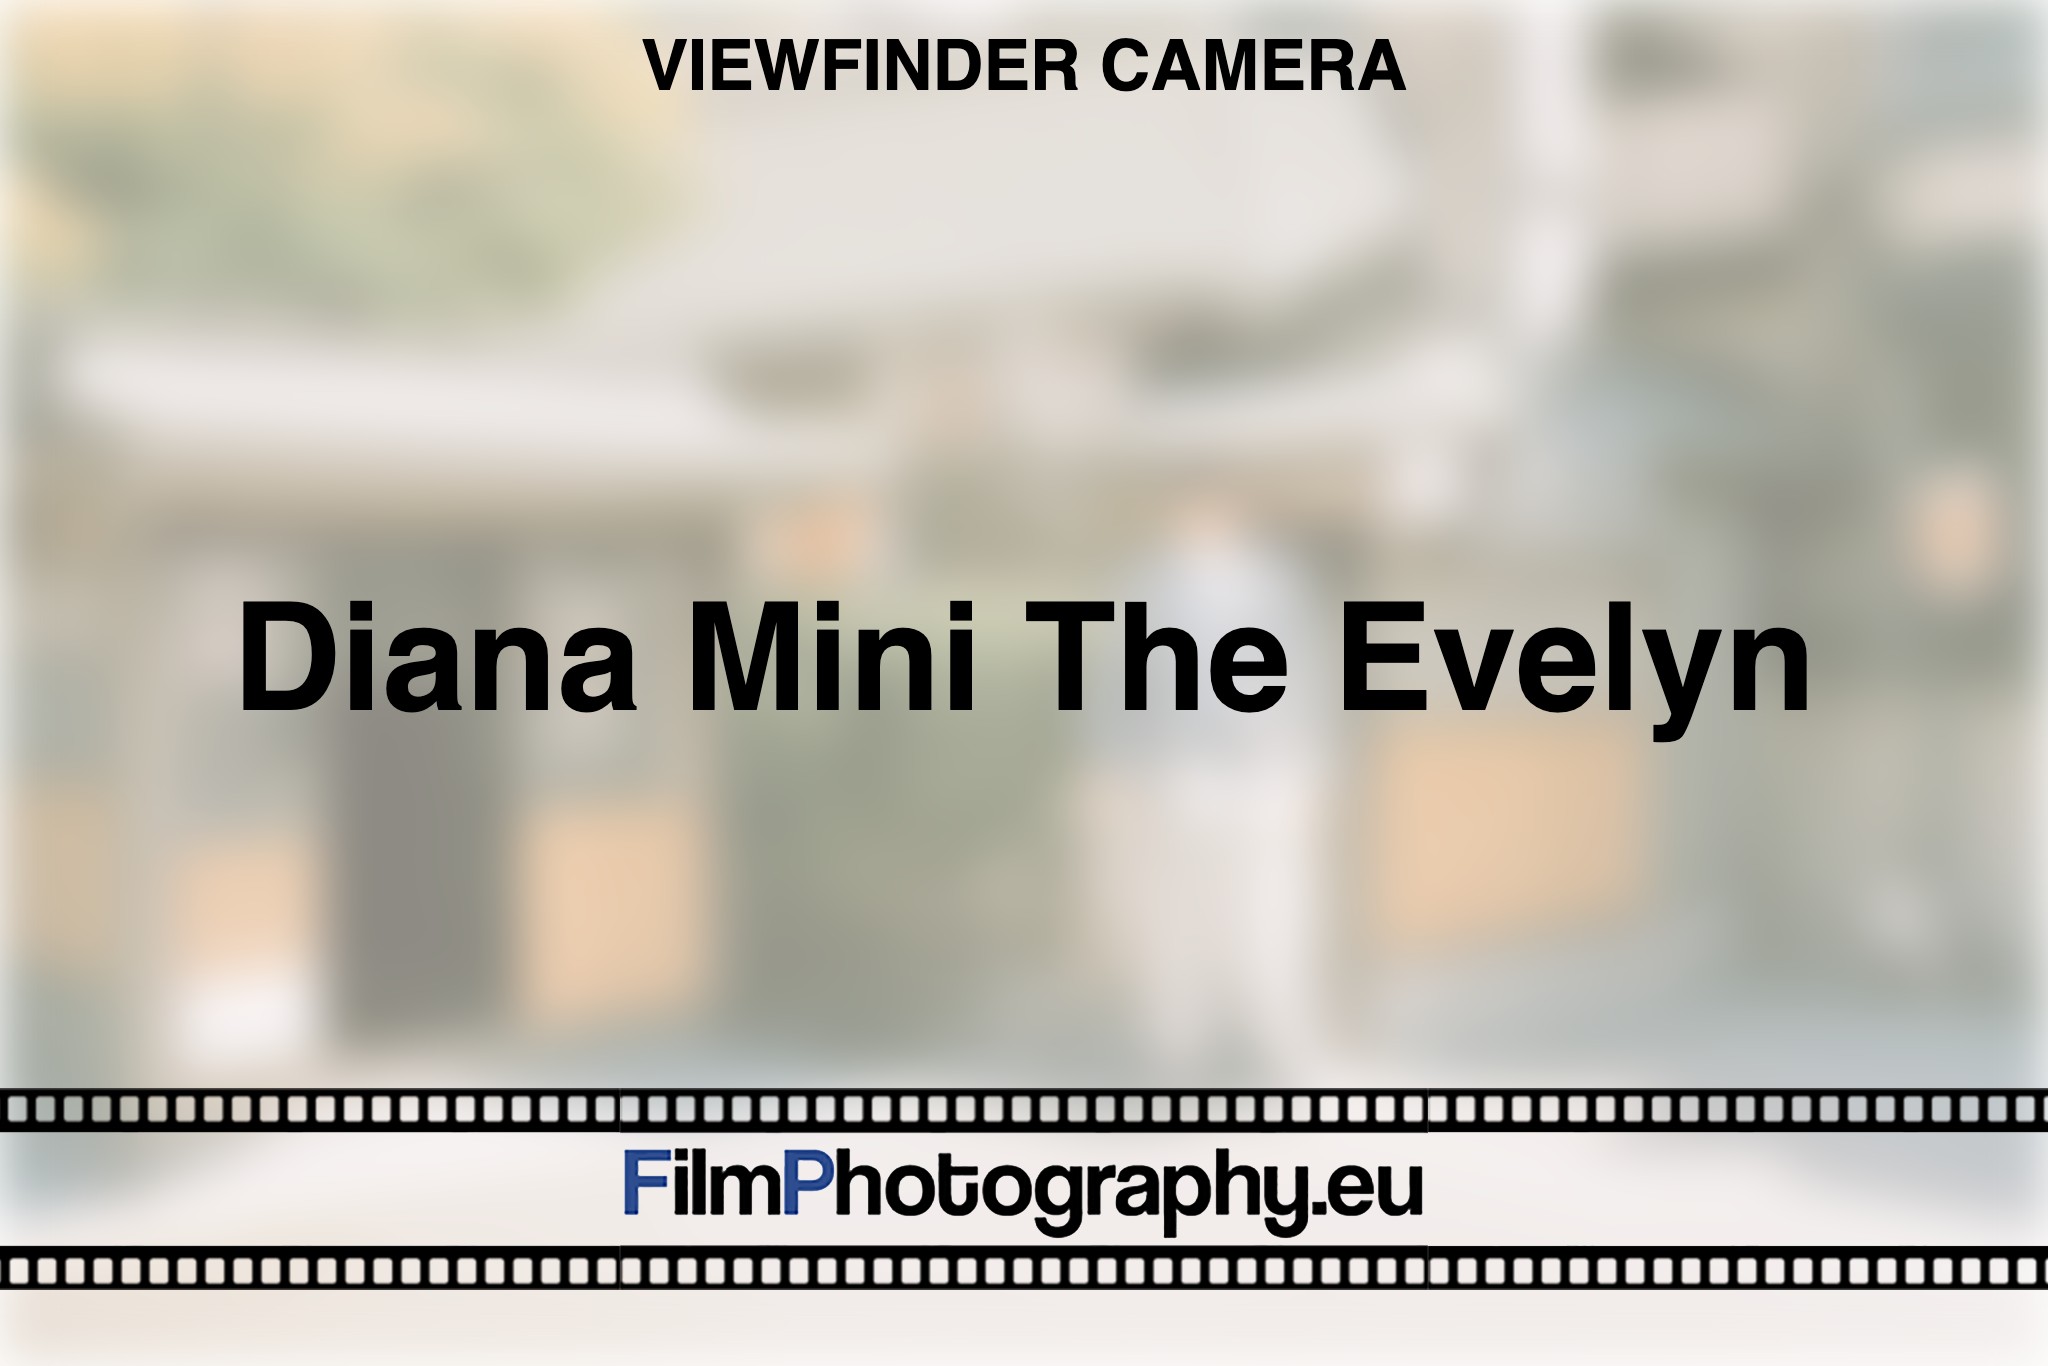 diana-mini-the-evelyn-viewfinder-camera-bnv